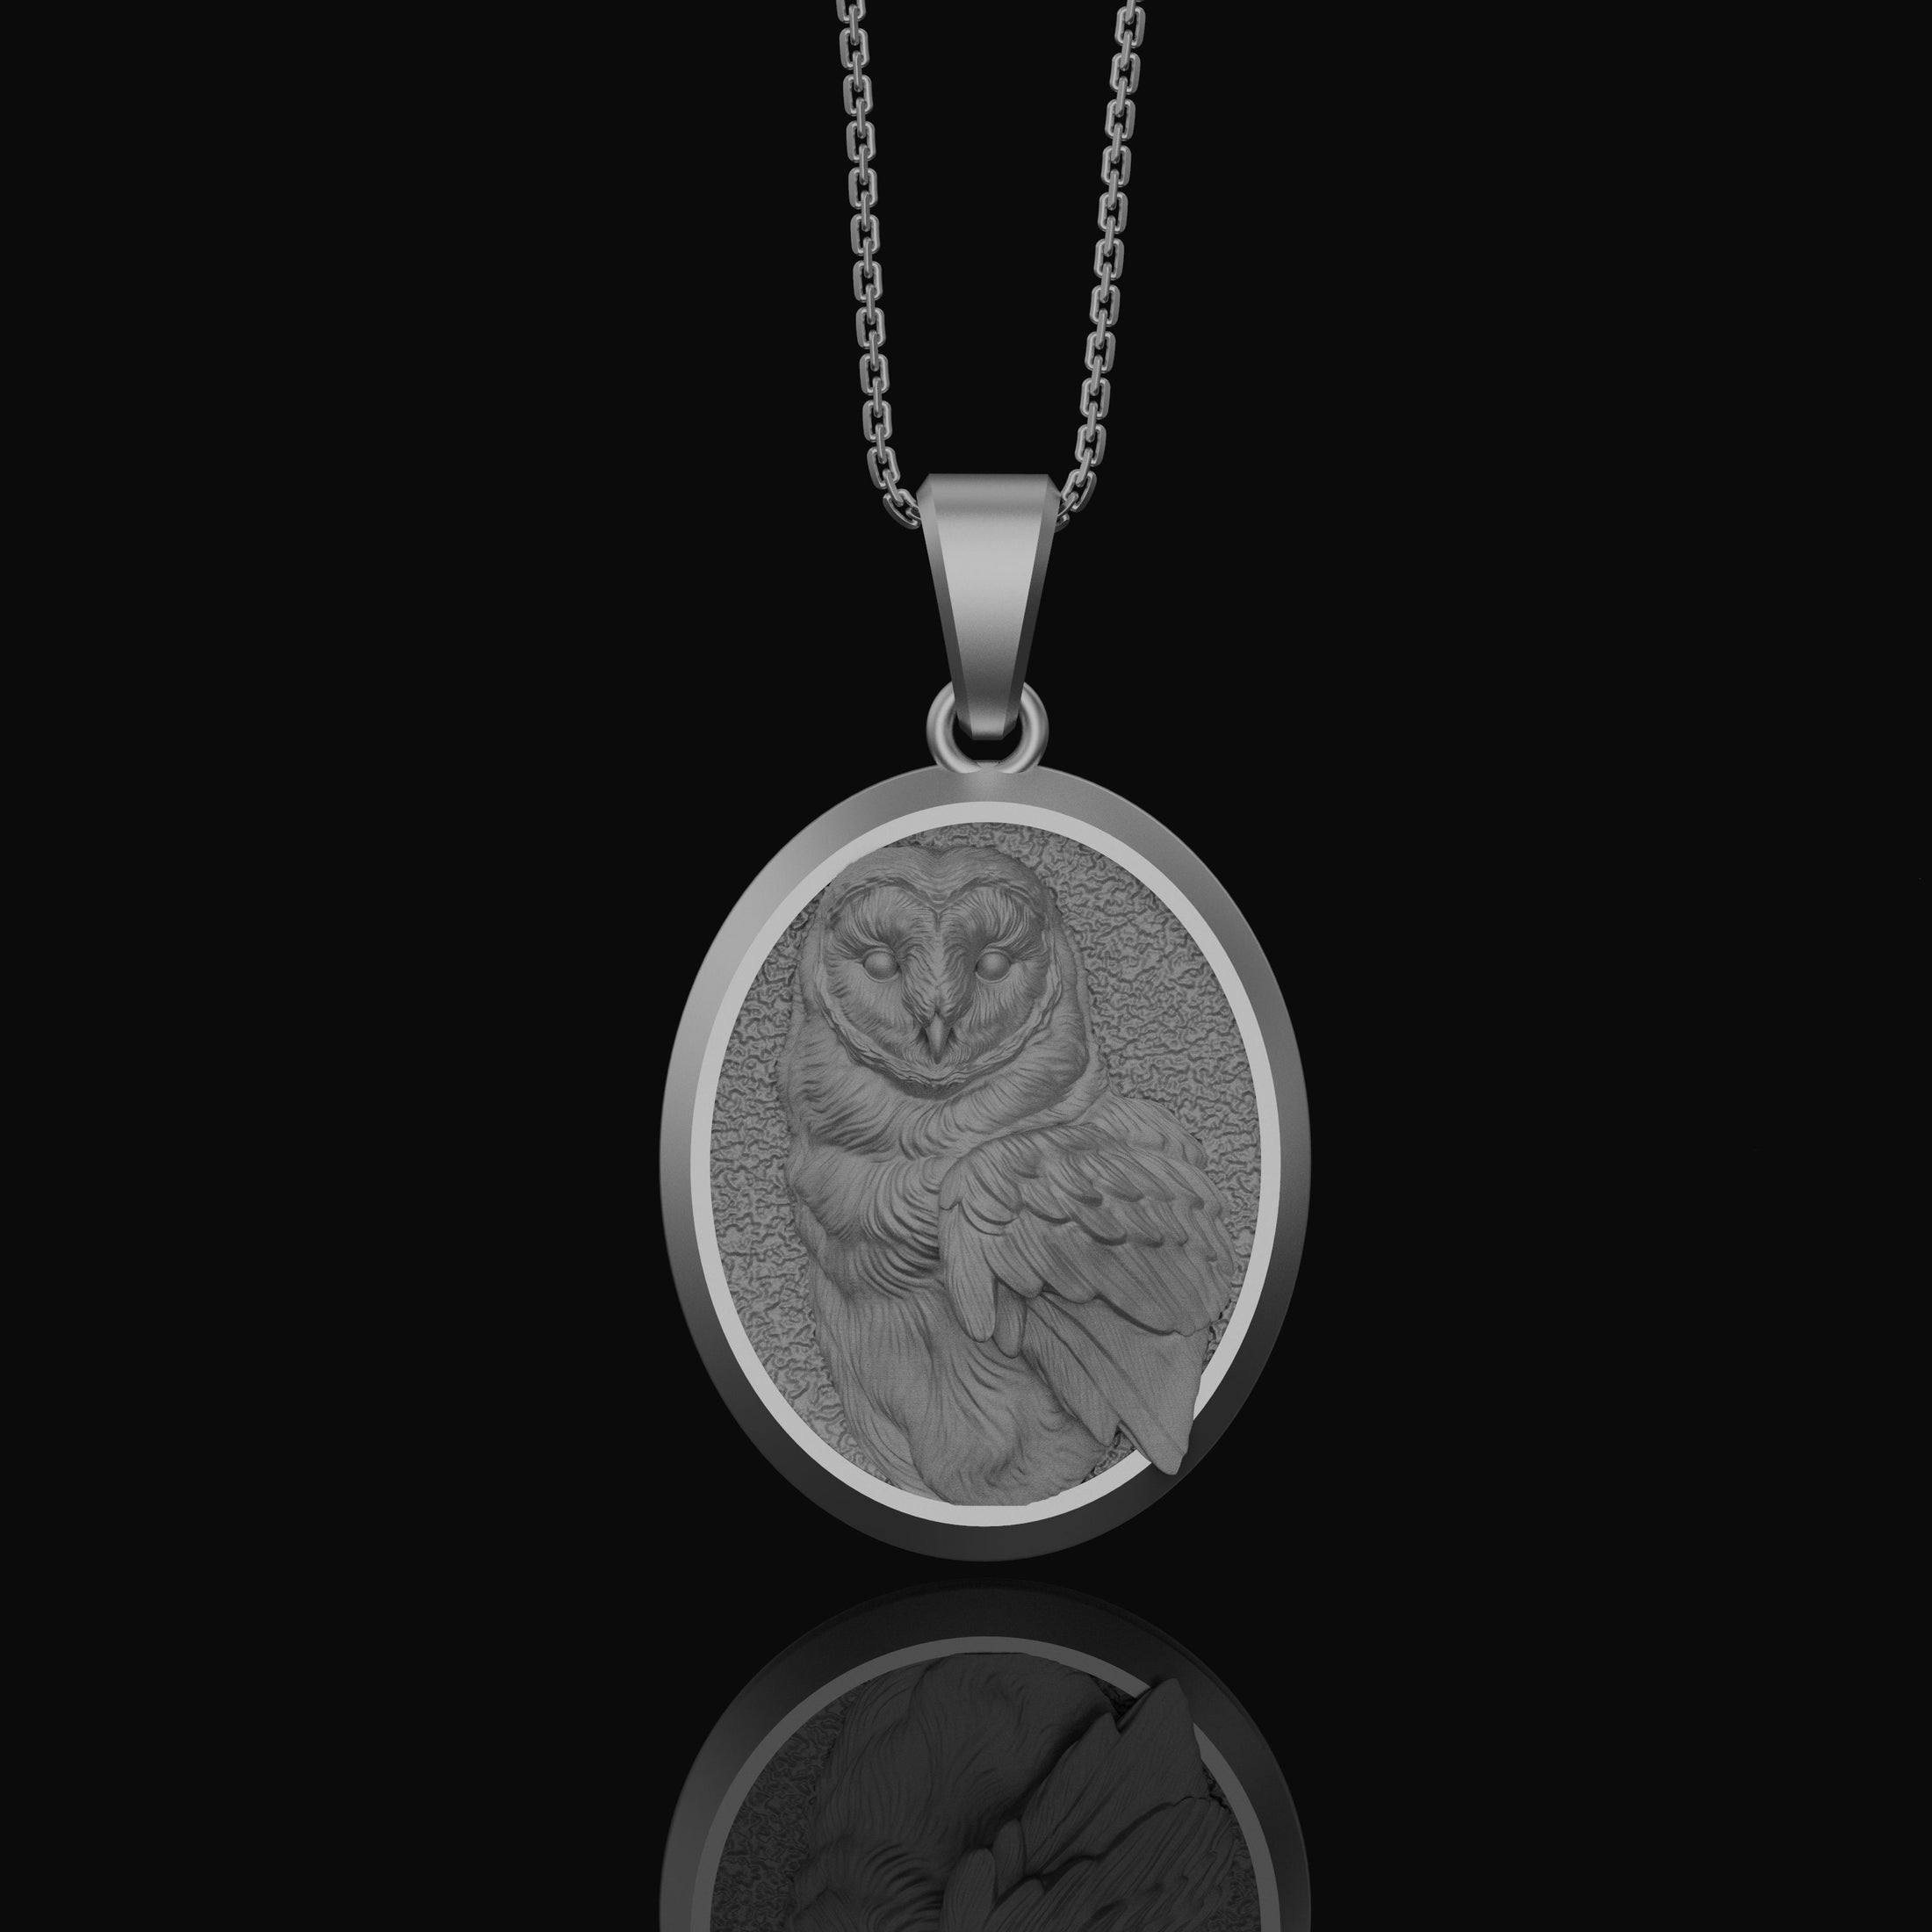 Personalized Silver Owl Pendant - Custom Engraved Owl Necklace, Handcrafted Bird Jewelry, Unique Gift